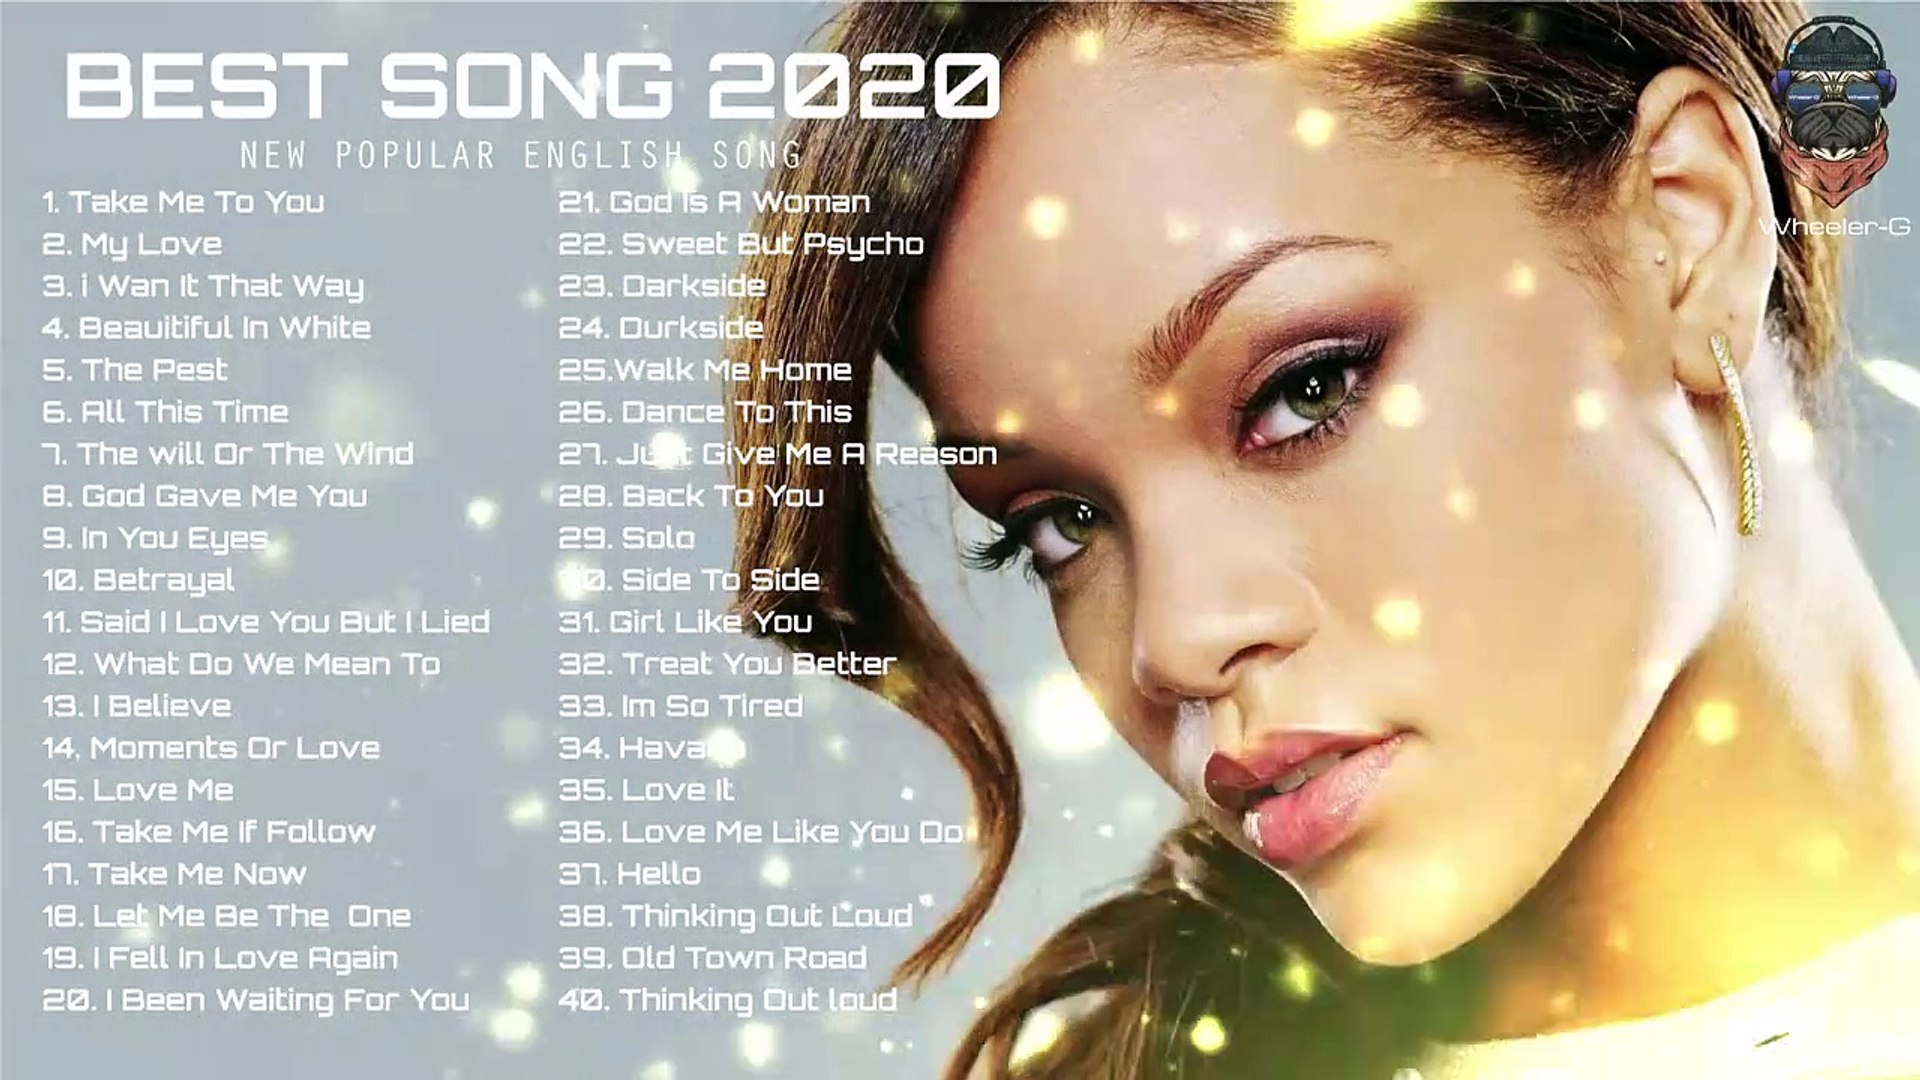 Top Hits 2020 Top 40 Popular Songs Playlist 2020 Best English Music Collection 2020 - [Wheeler-G]